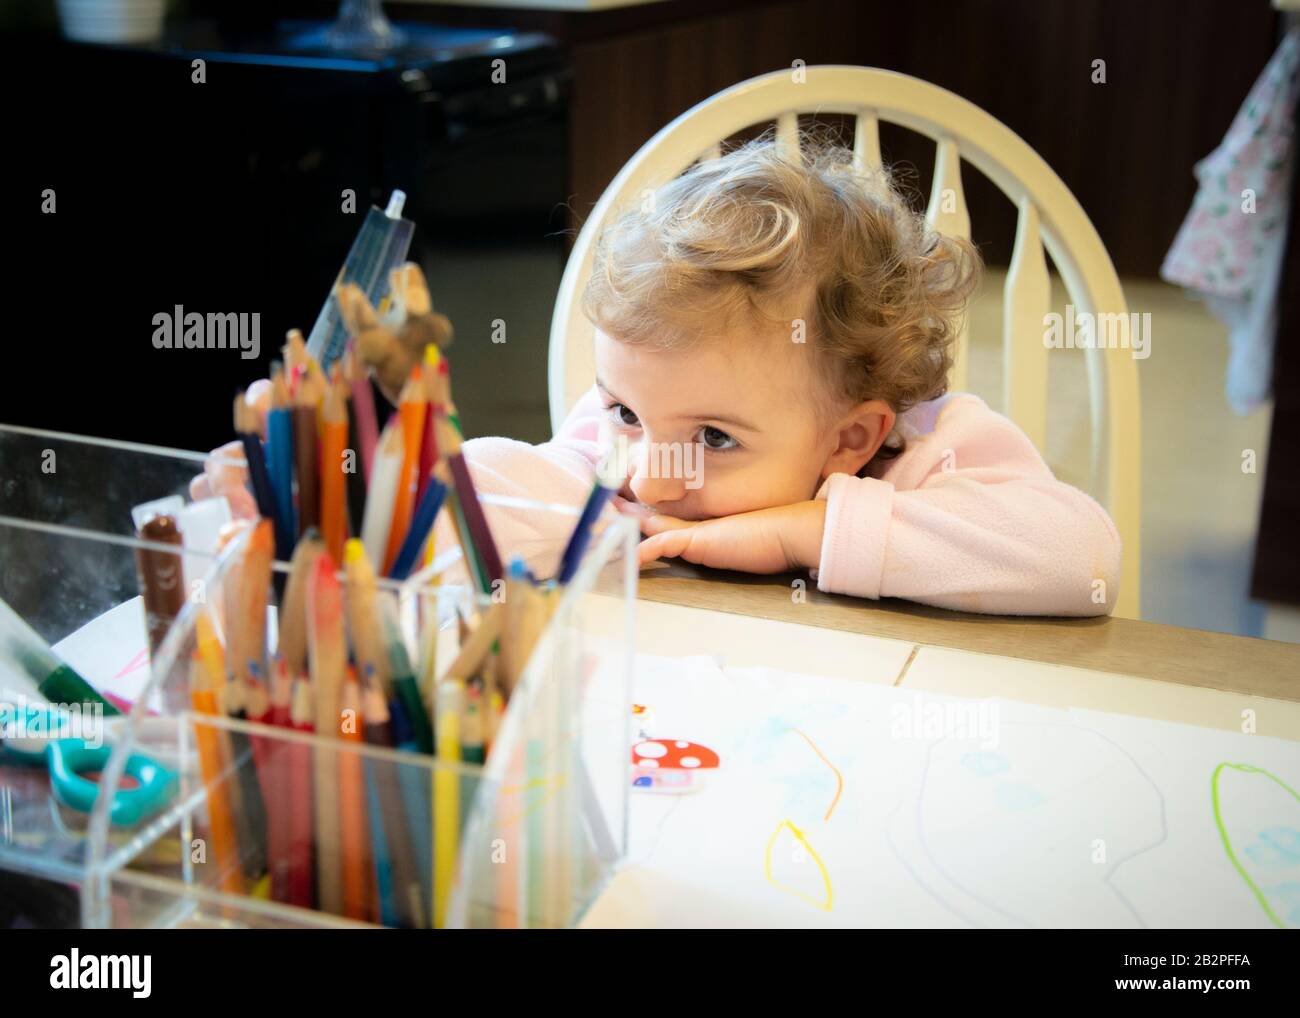 child leaning on table looking thoughtful,staring at holder containing colored,pencils and crayons. Stock Photo